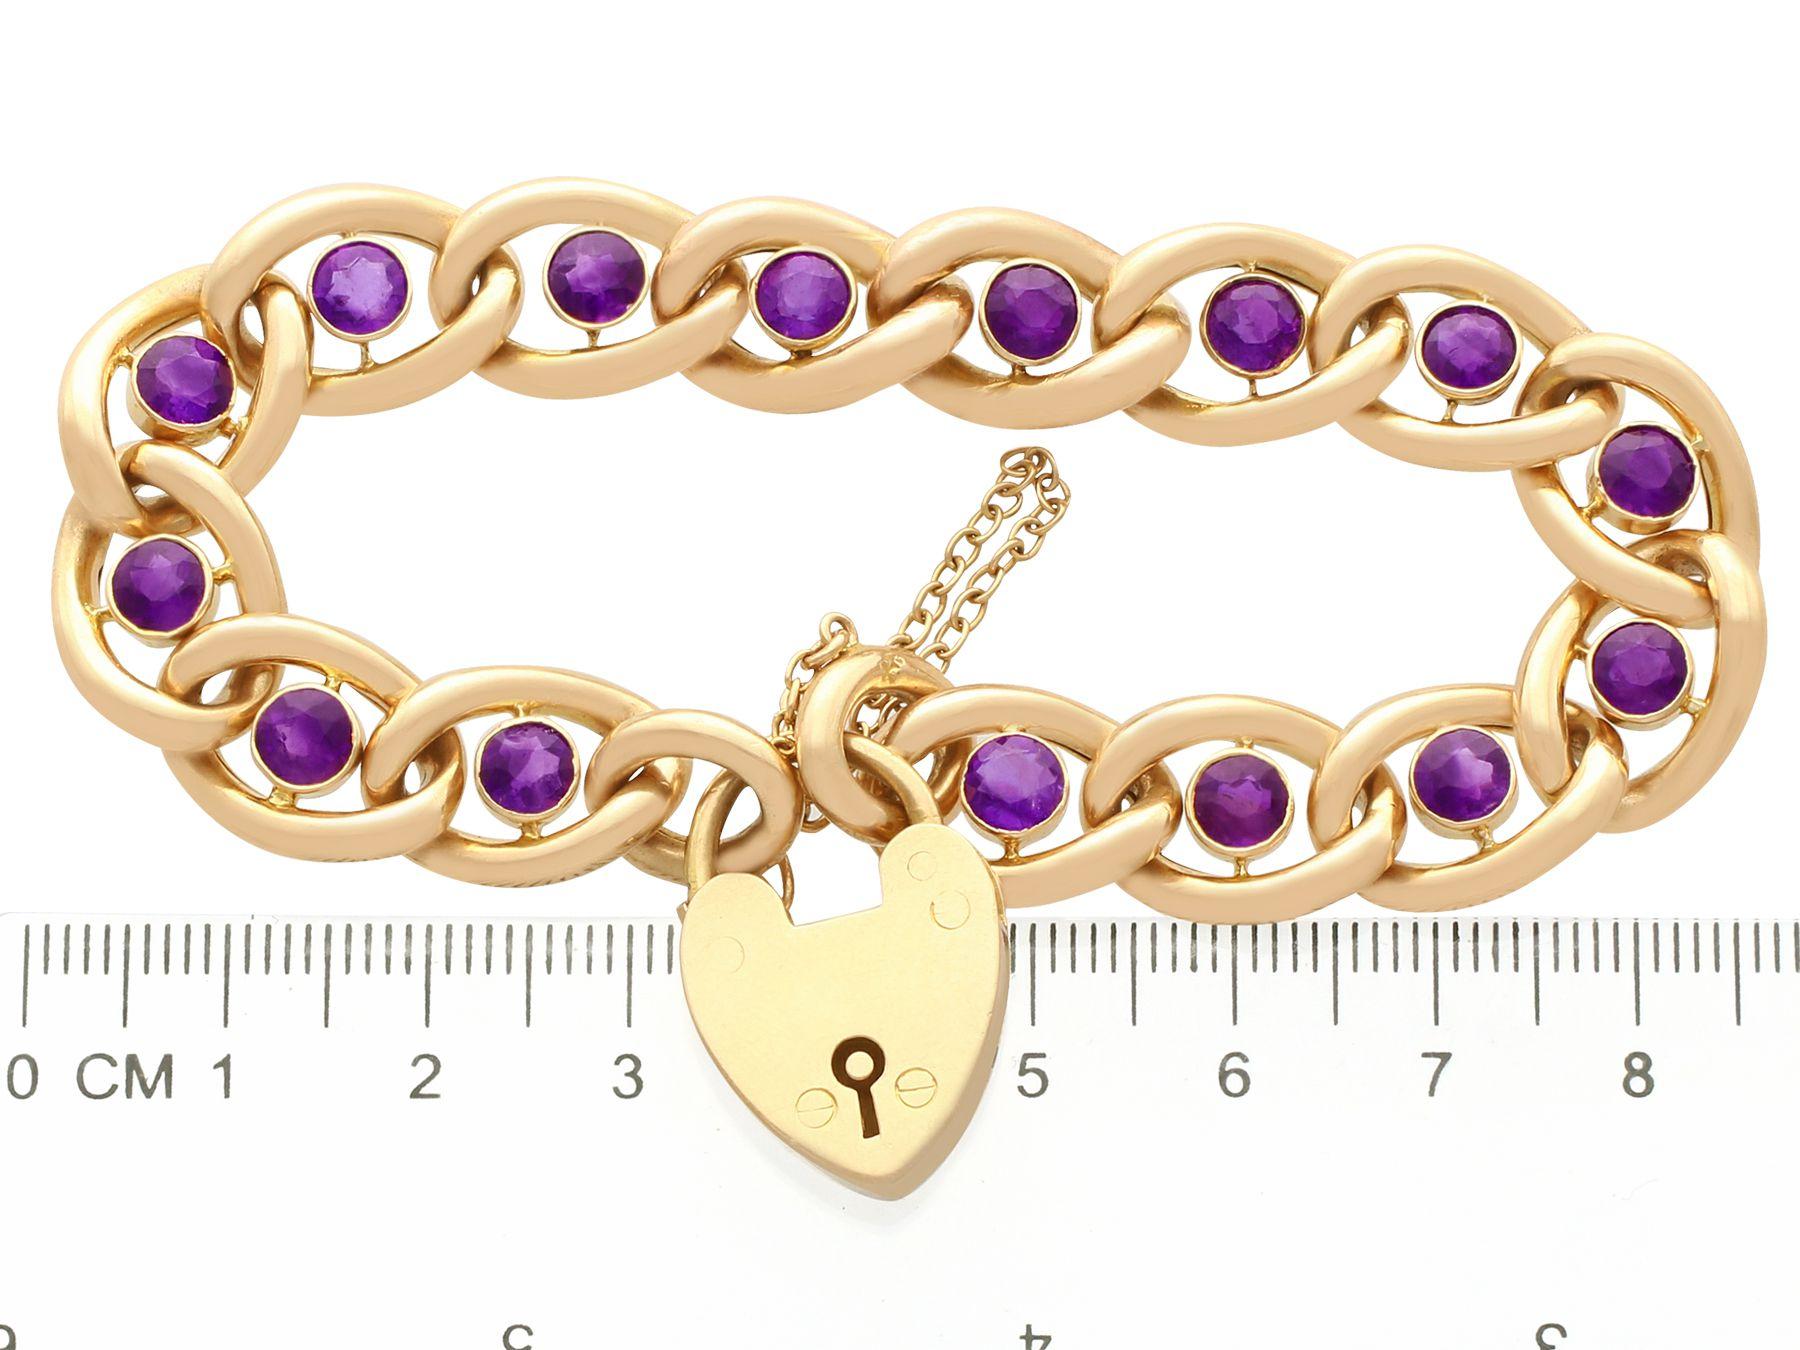 Women's or Men's Antique 3.75 Carat Amethyst and Gold Bracelet with Heart Padlock Clasp For Sale